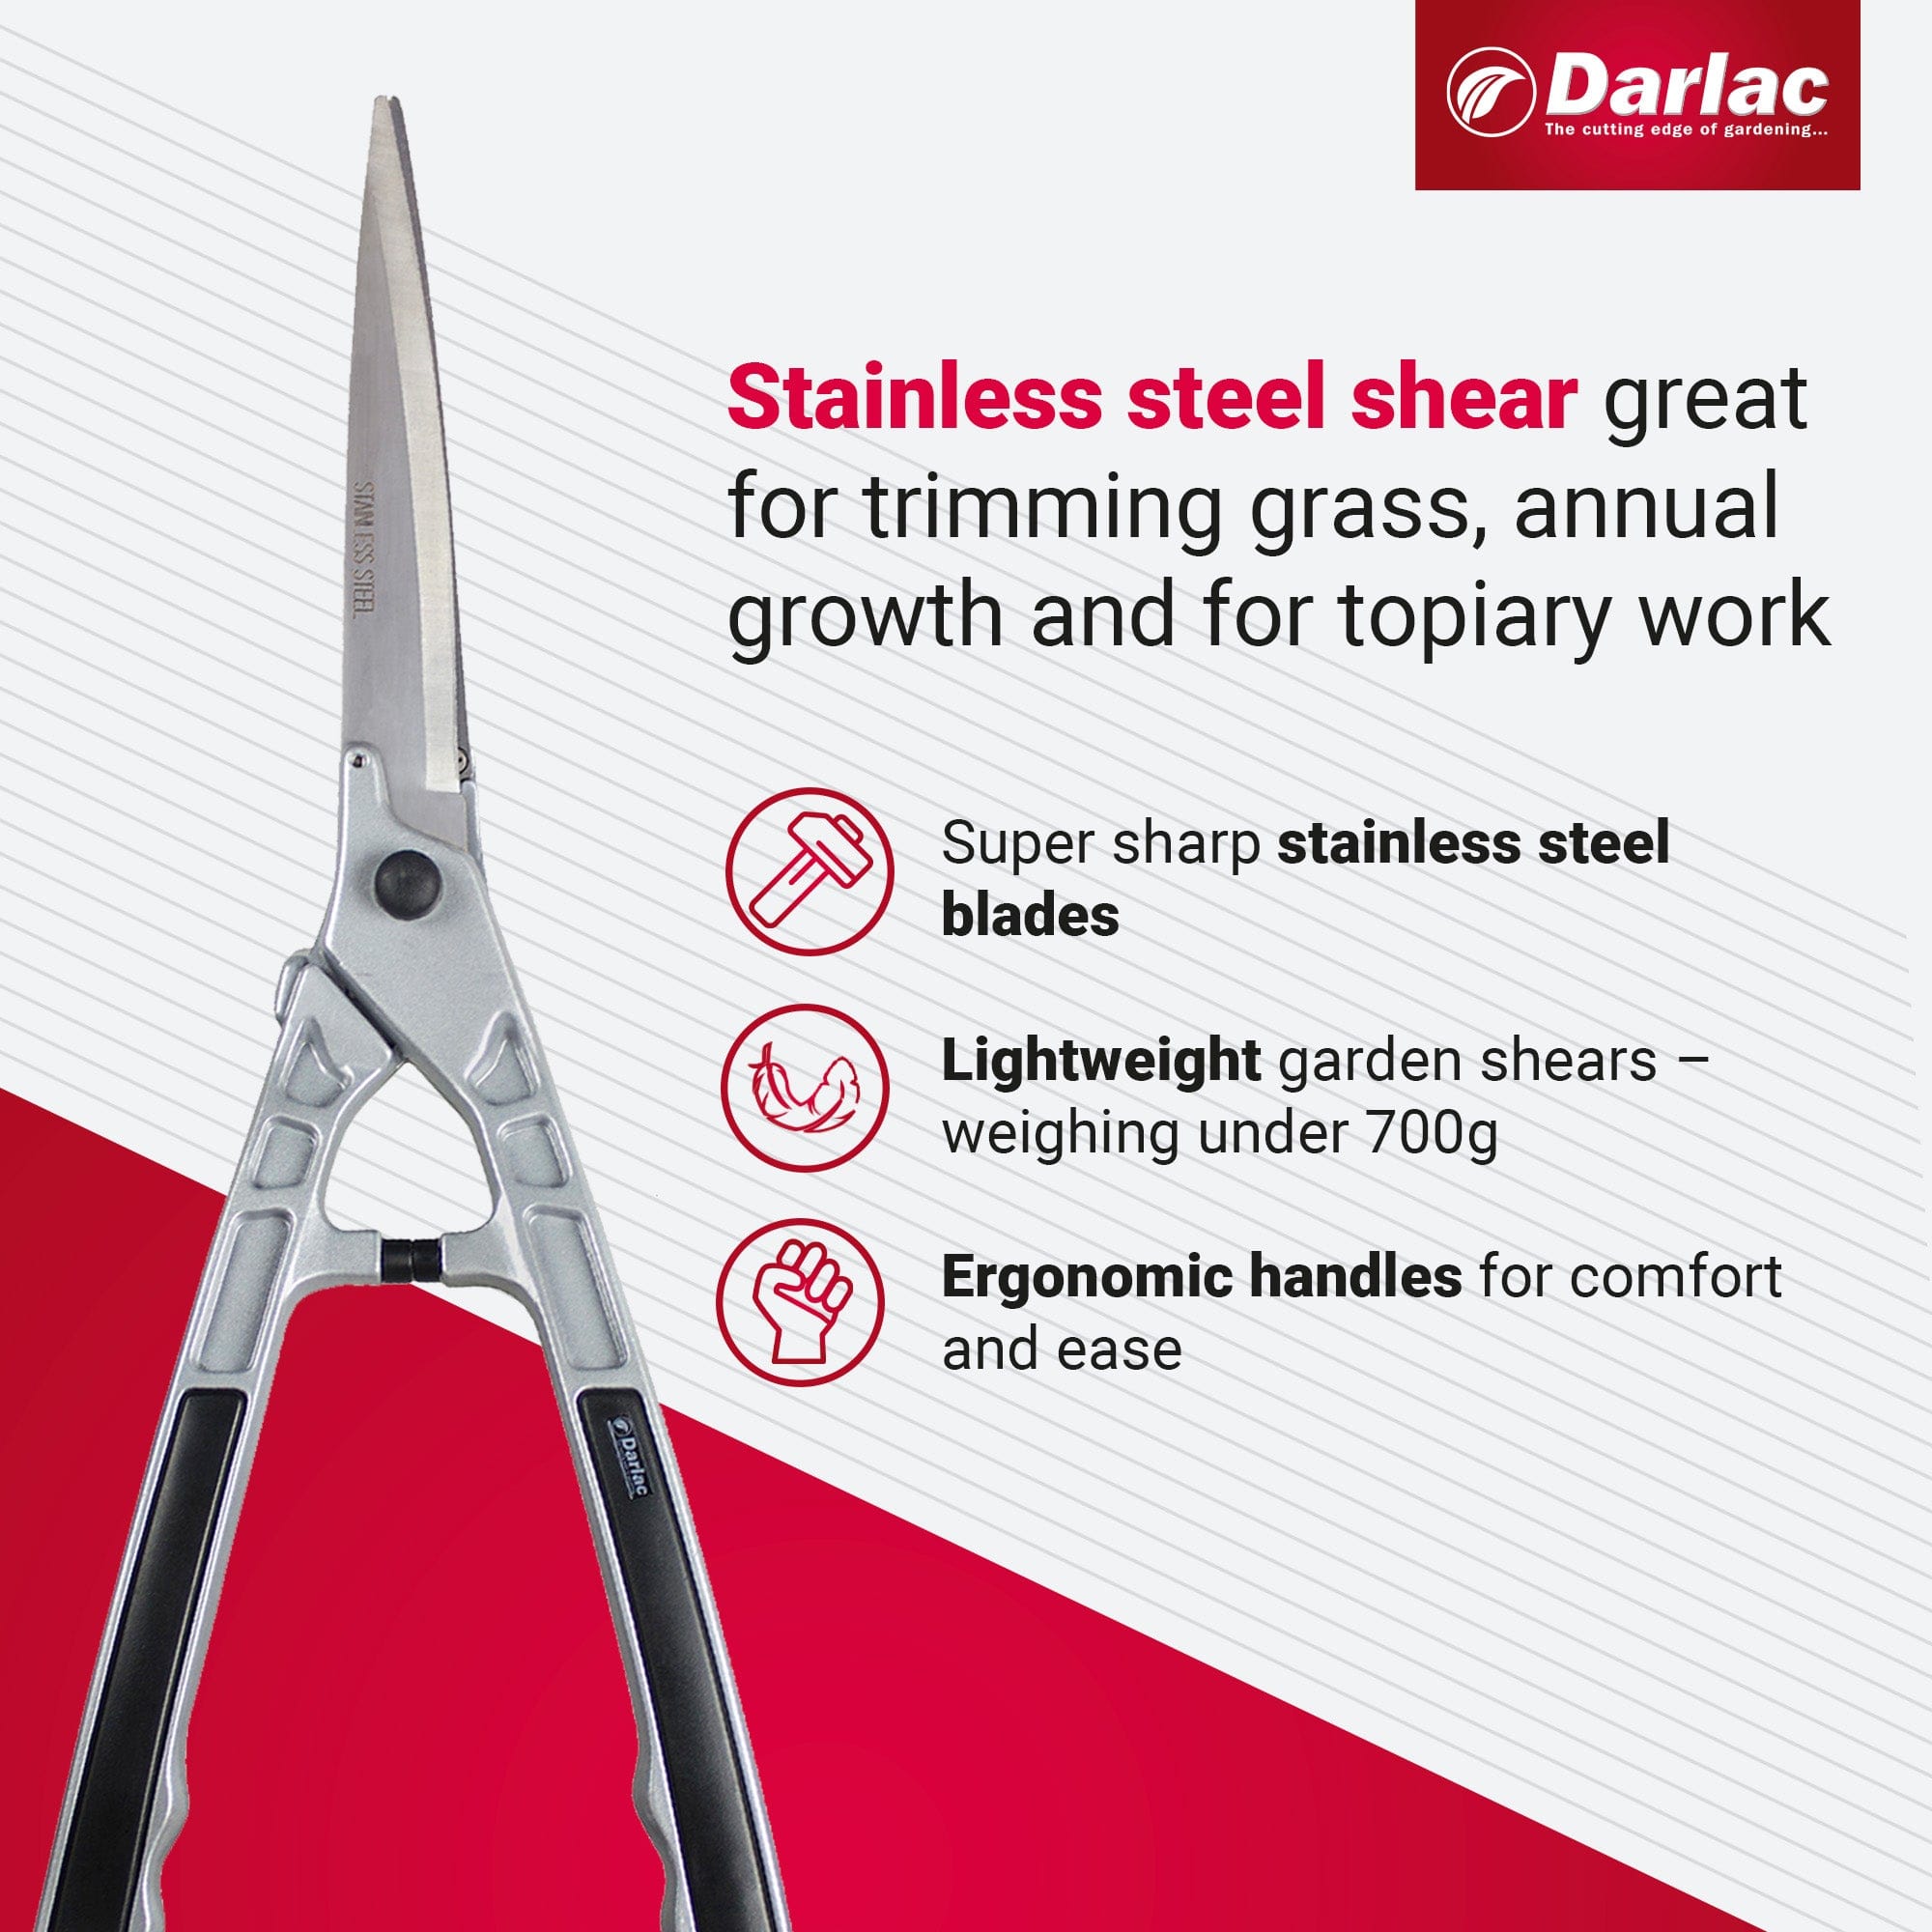 dt-brown HARDWARE Darlac Stainless Steel Shear